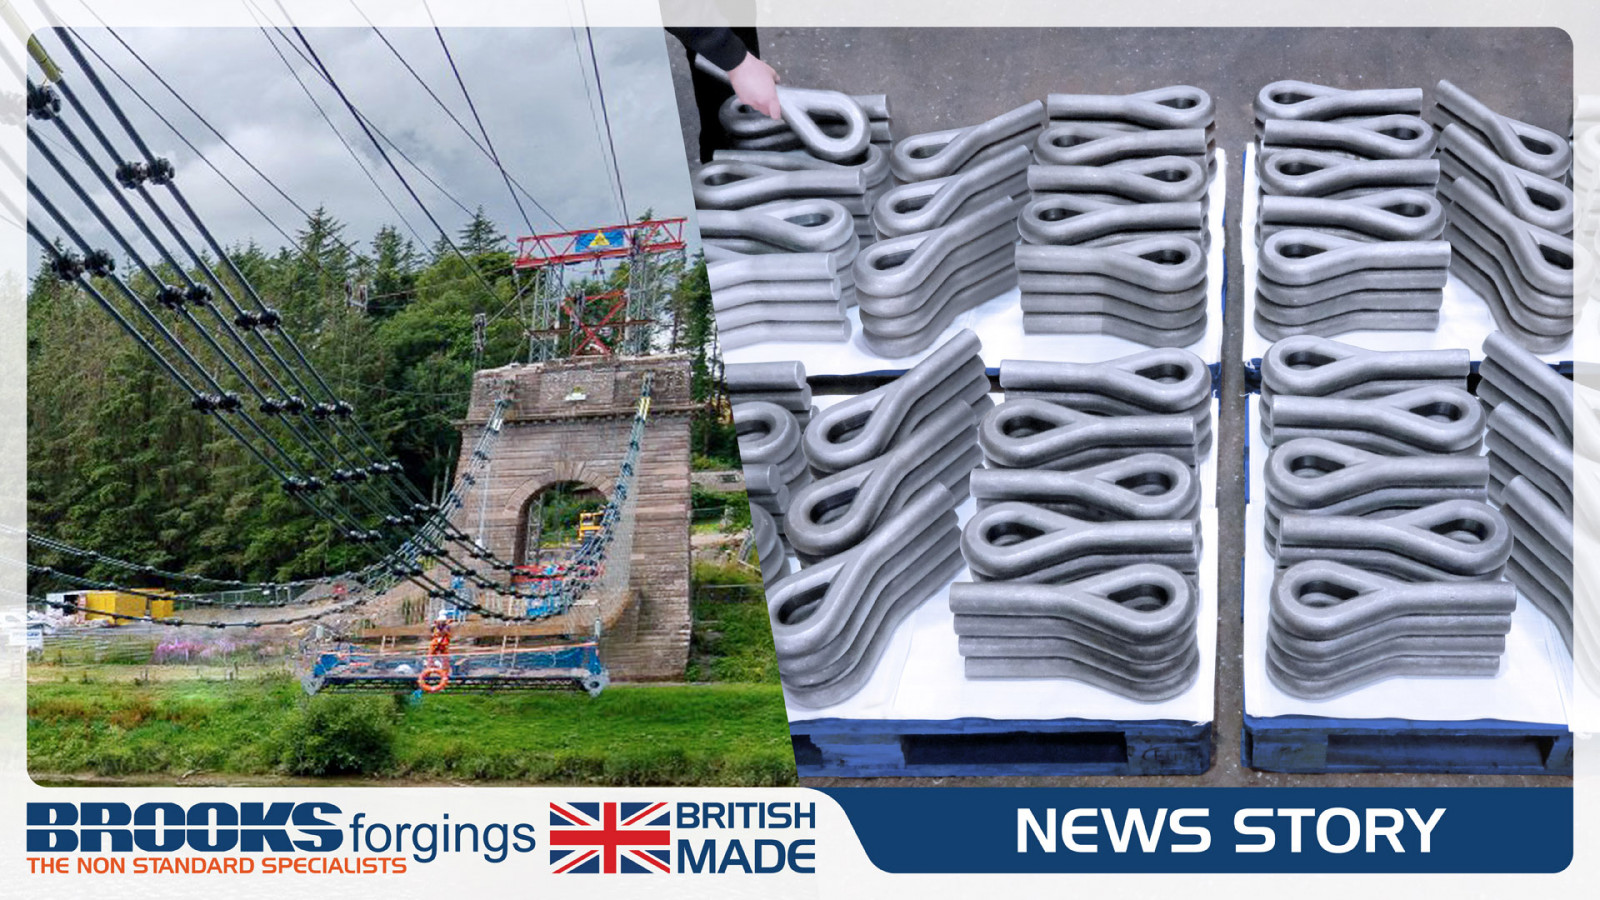 Brooks Forgings Produce Forged Components For The Union Chain Suspension Bridge Restoration Project